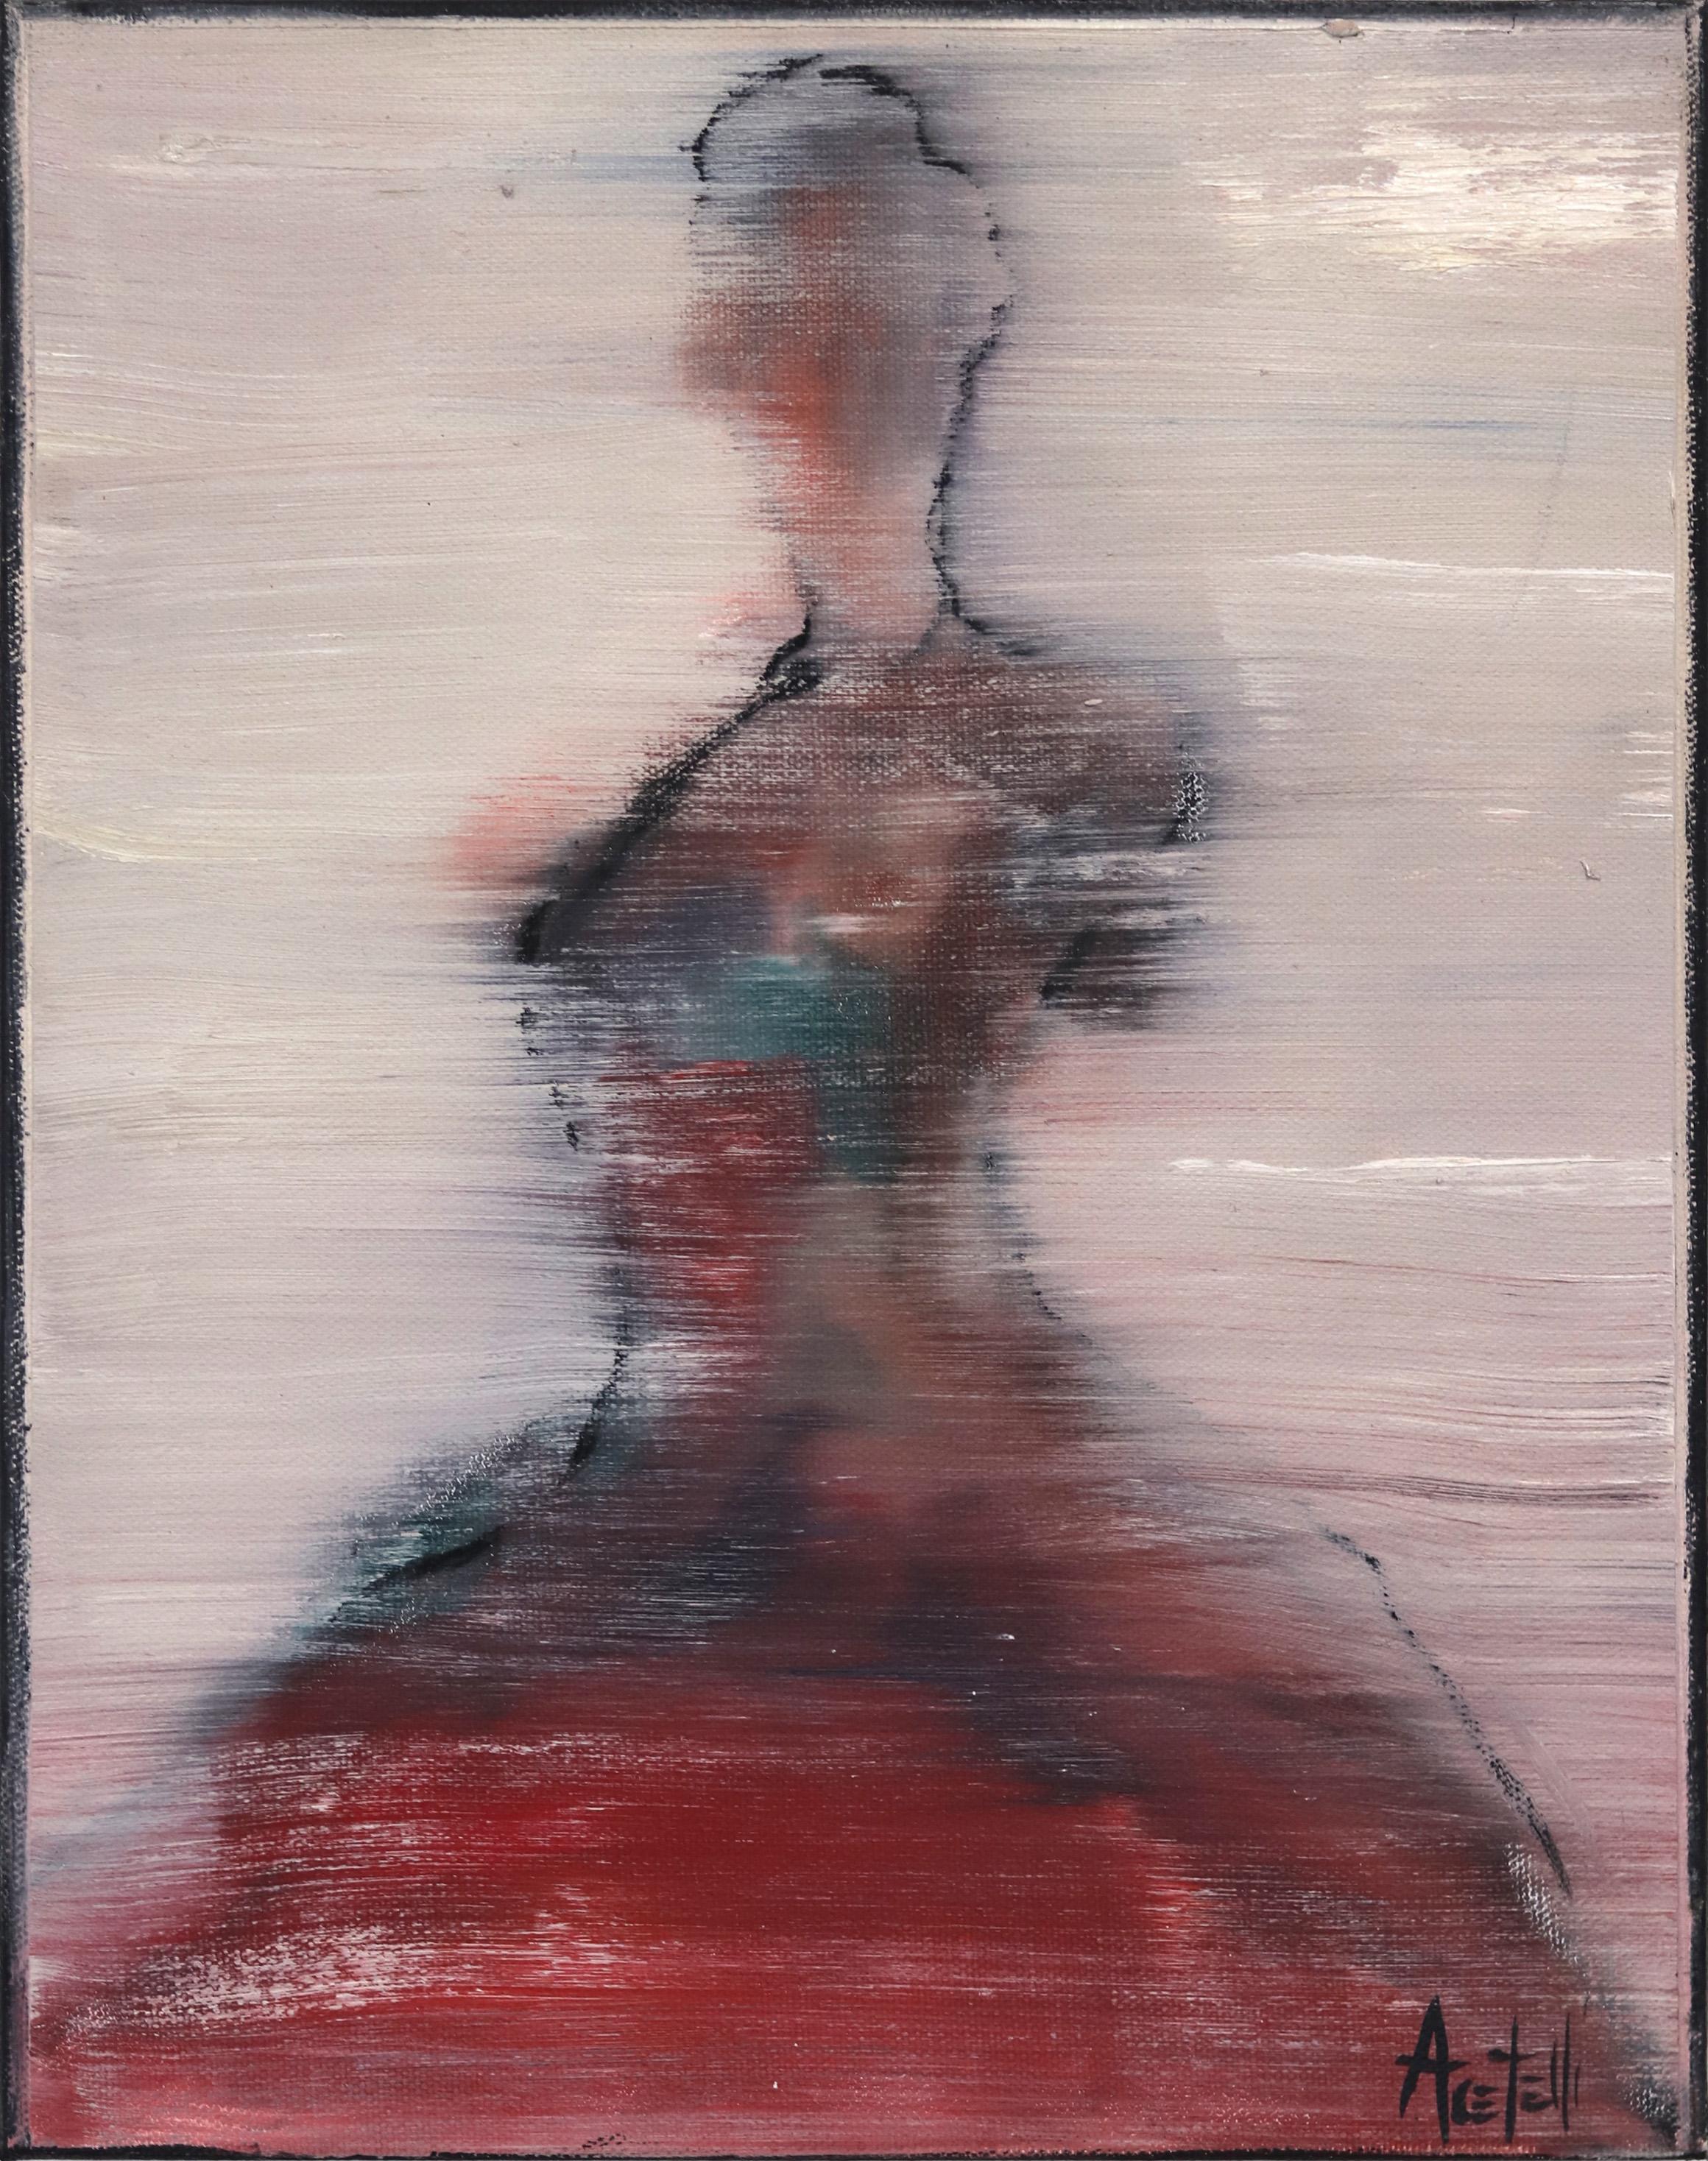 Mark Acetelli Figurative Painting - Aria #3 - Original Oil on Canvas Abstract Figurative Dancer Painting